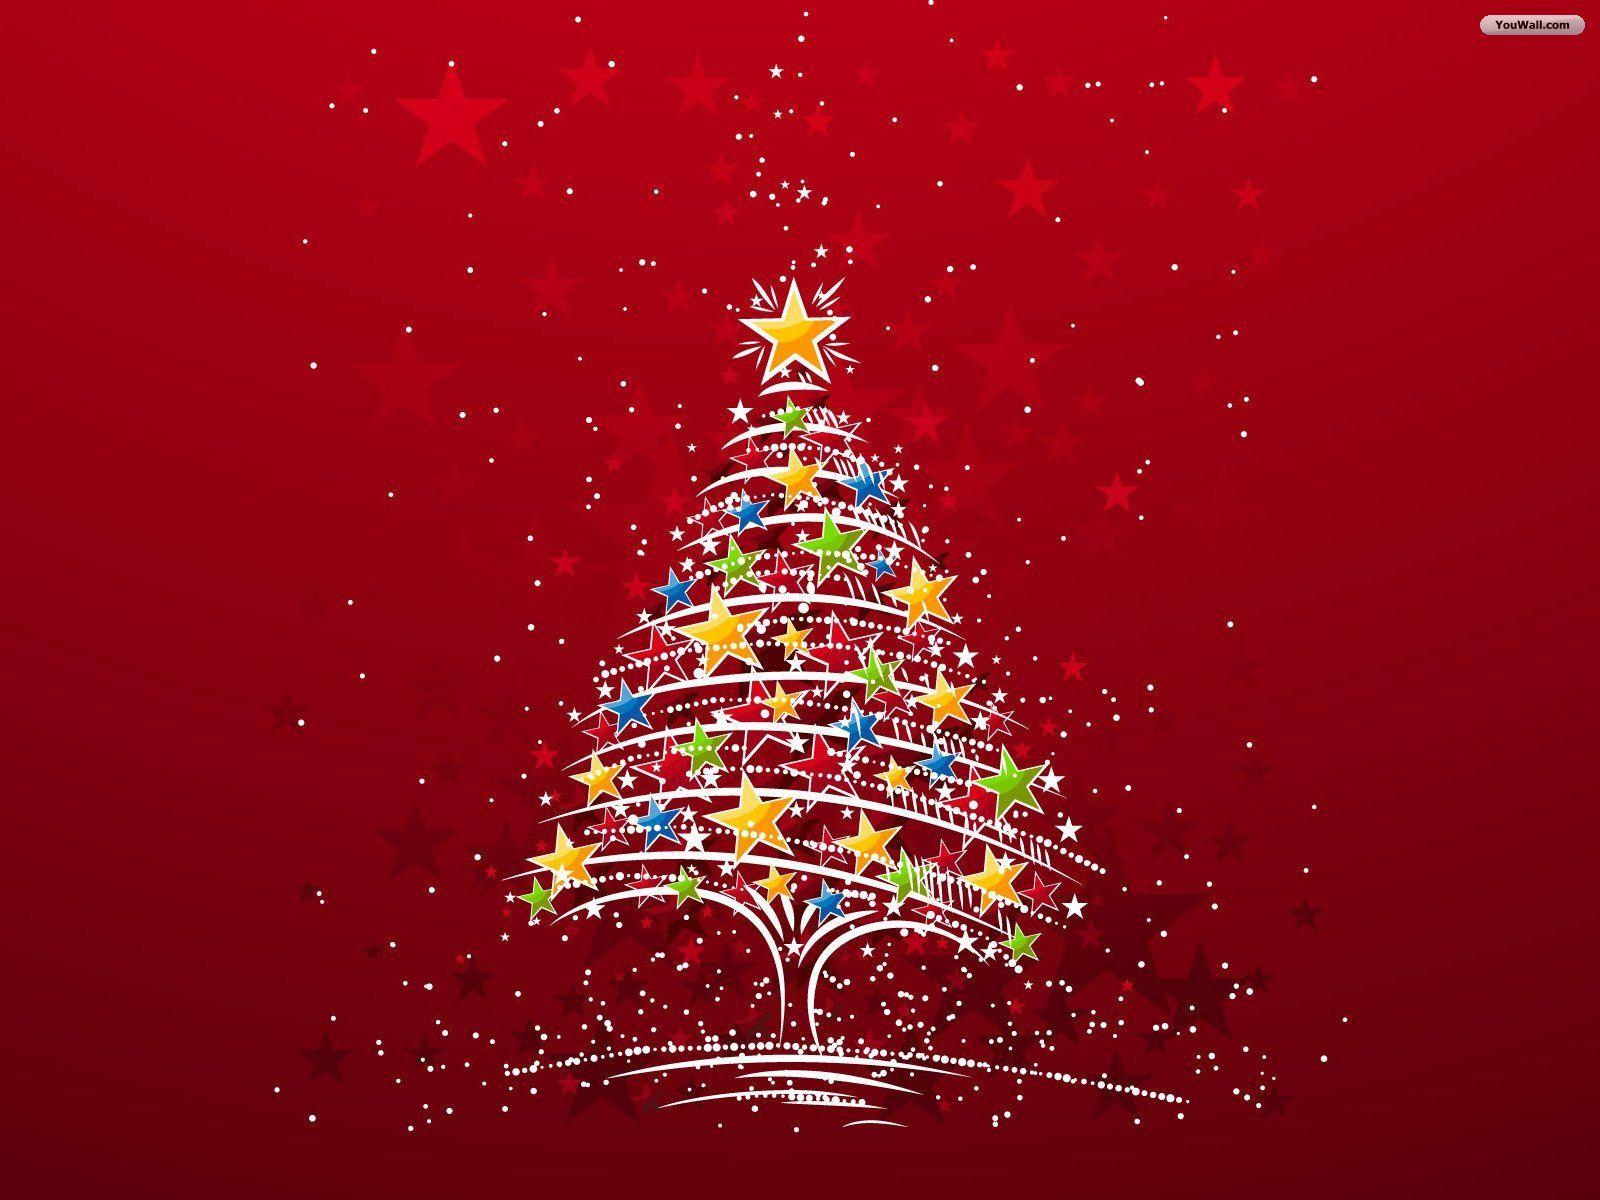 Splendid Christmas Wallpaper for Android 1600x1200PX Free